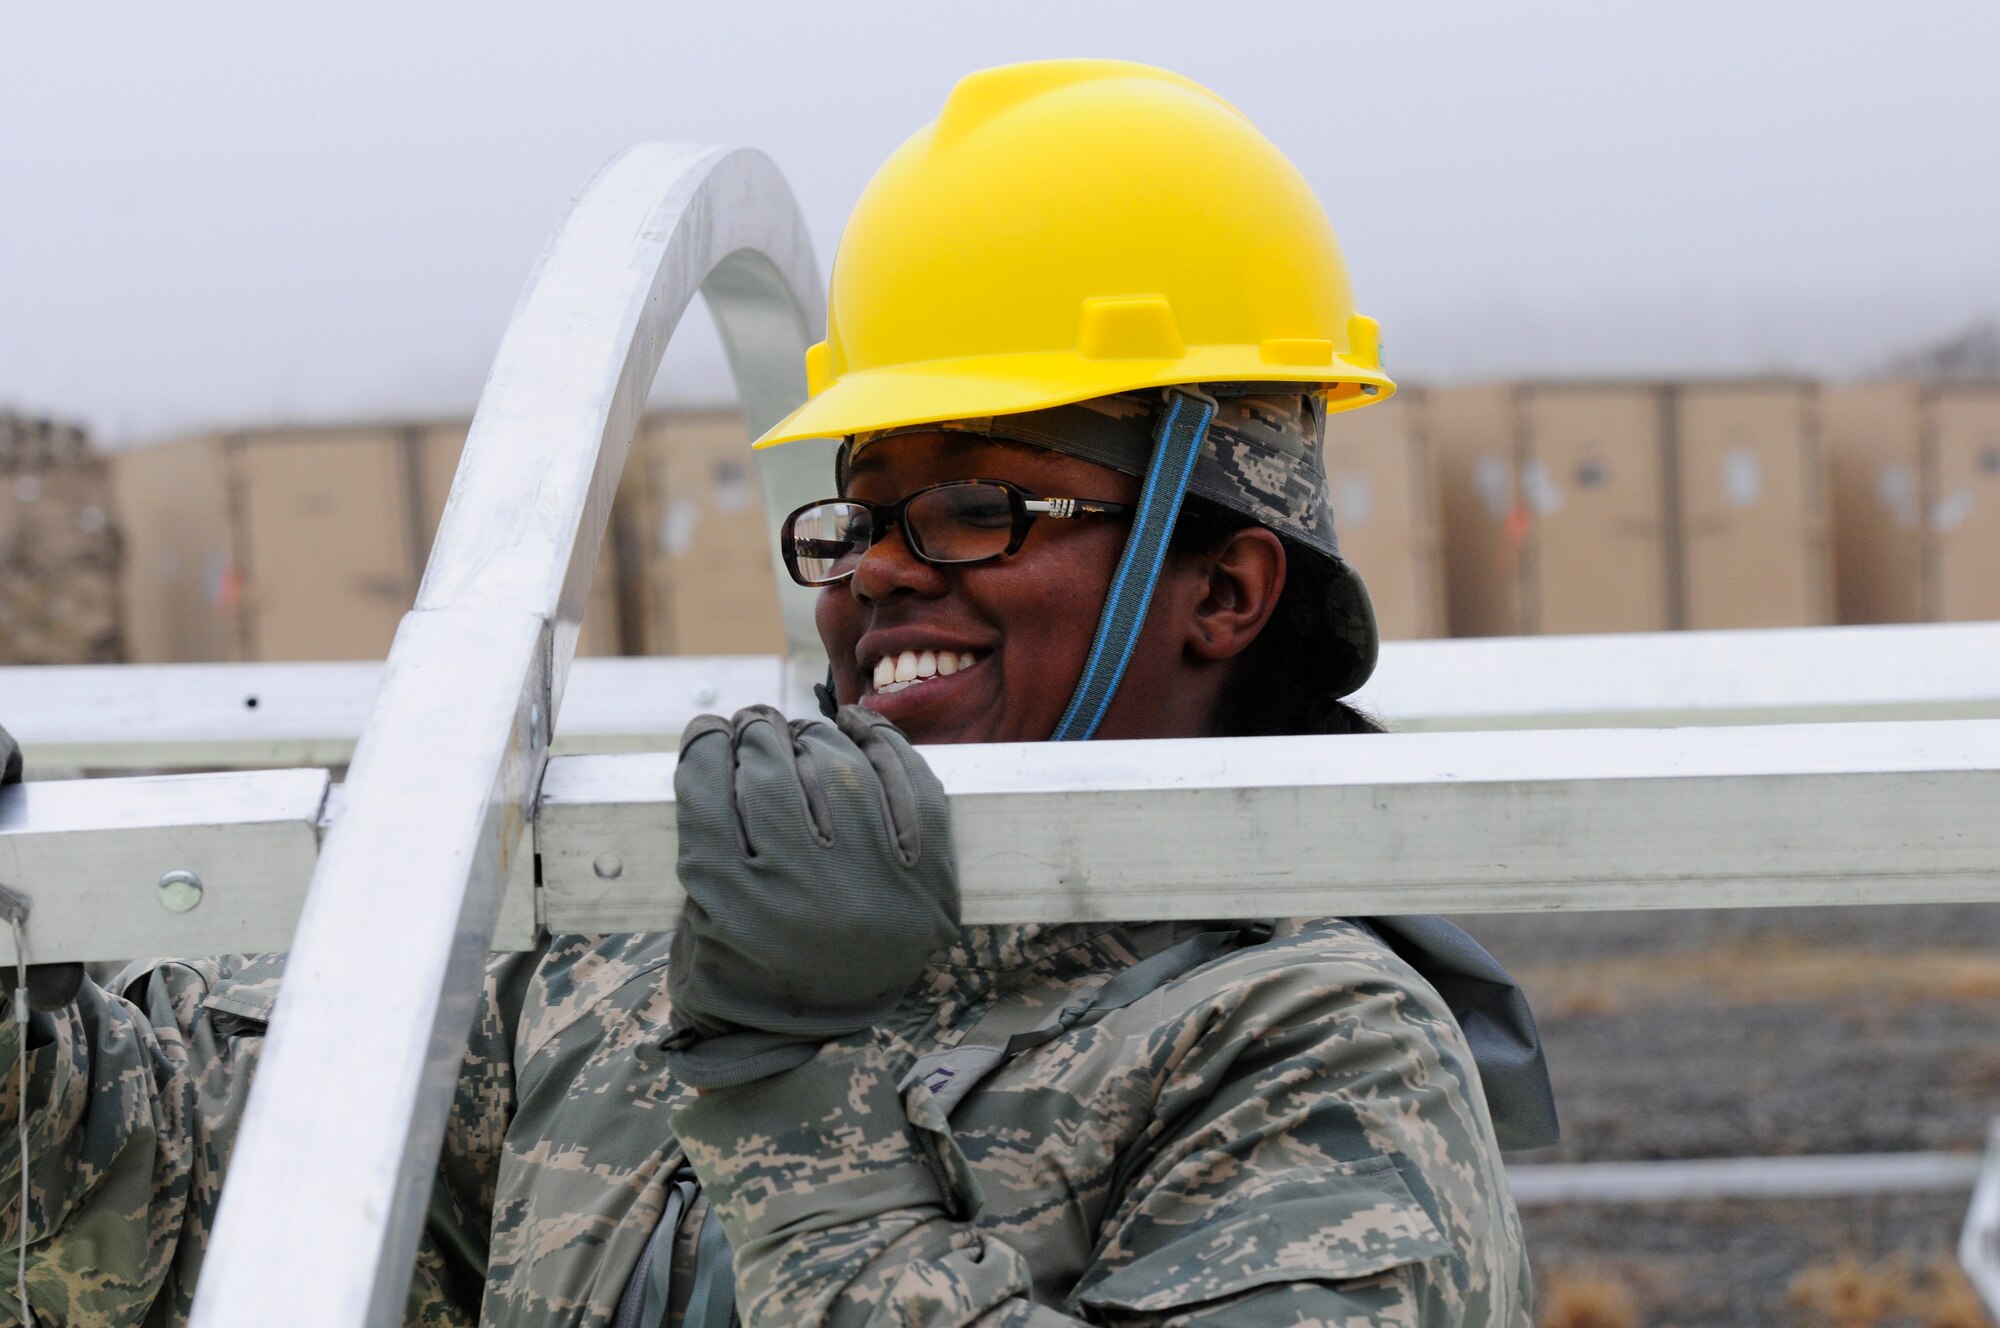 U.S. Air Force Master Sgt. Leslie Minus, 145th Civil Engineer Squadron, installs frame on an Alaskan Small Shelter System, one of 16 tents being set up to house personnel participating in Vigilant Guard 2015 exercise. VG 2015, held at the 145th CES Regional Training Site, New London, N.C., March 6-8, 2015, is designed to measure the effectiveness of National Guard forces supporting civilian activities, training together as true partners in order to respond effectively to natural disasters. (U.S. Air National Guard photo by Master Sgt. Patricia F. Moran, 145th Public Affairs/Released)